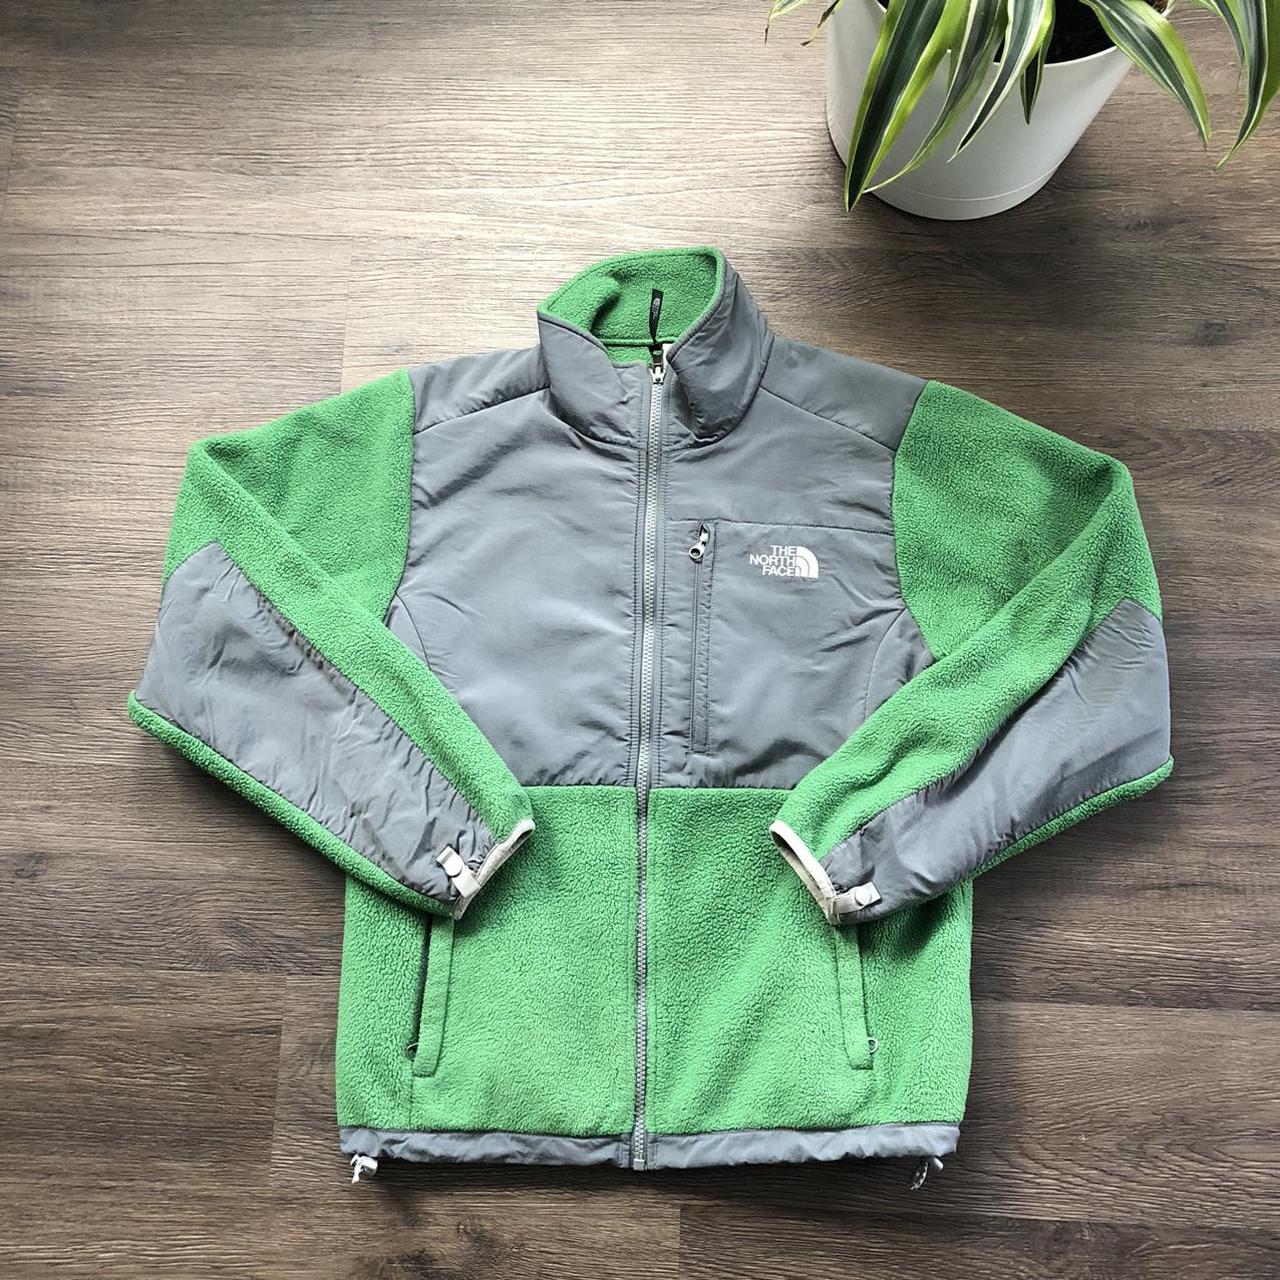 The North Face Women's Grey and Green Jacket